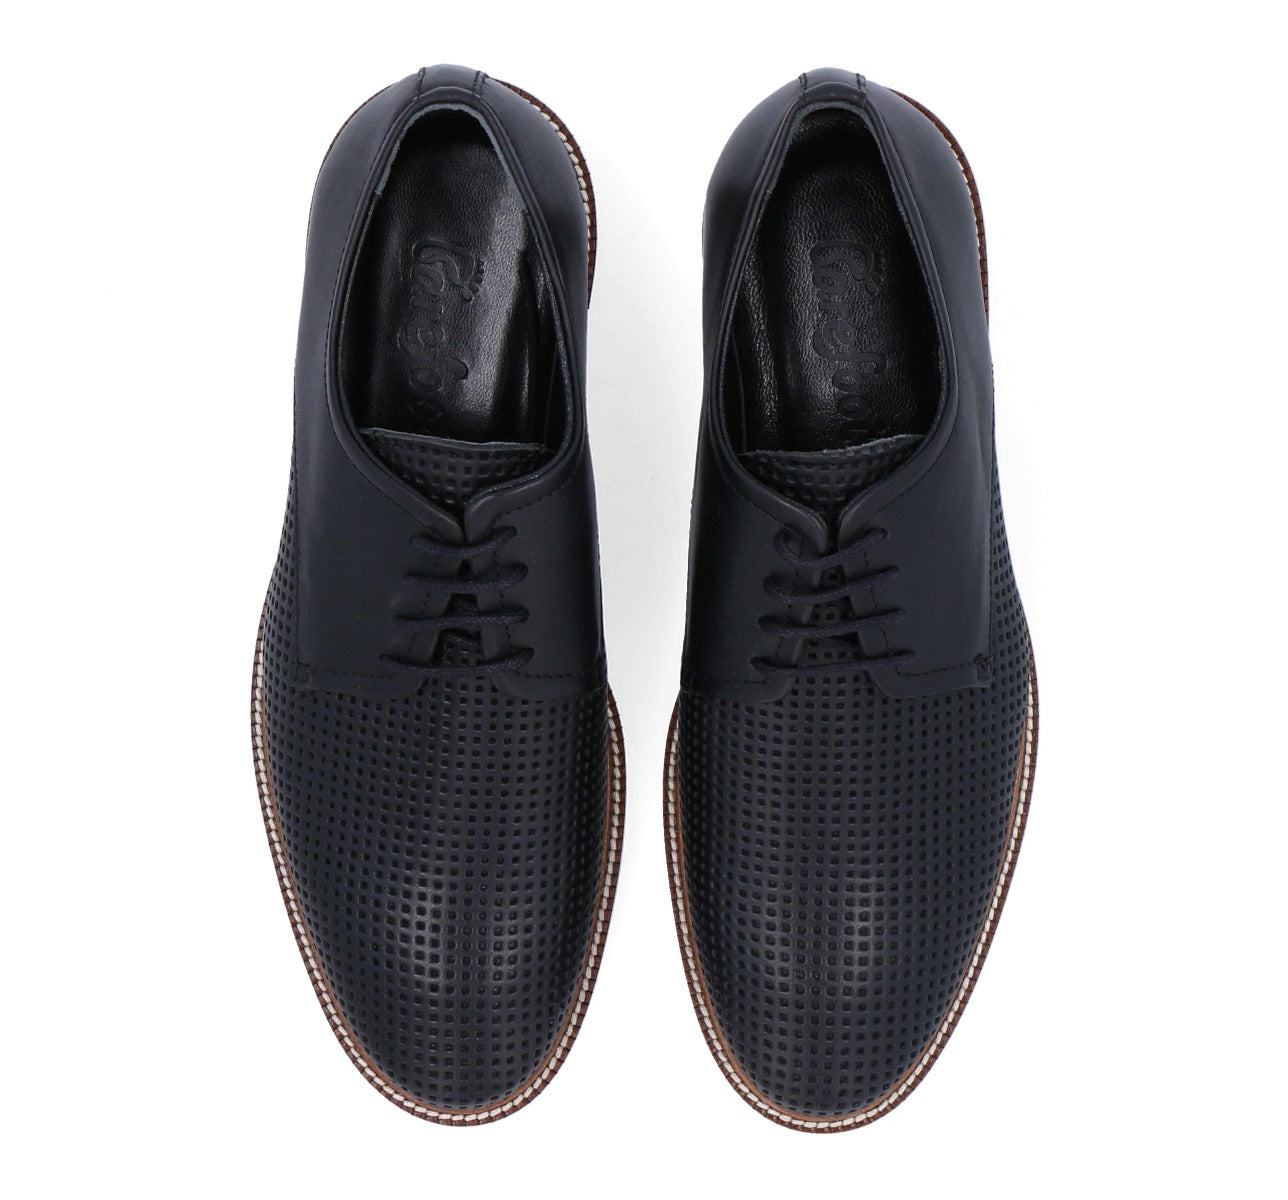 Barefoot Black Lace Up with White Sole For Men 229